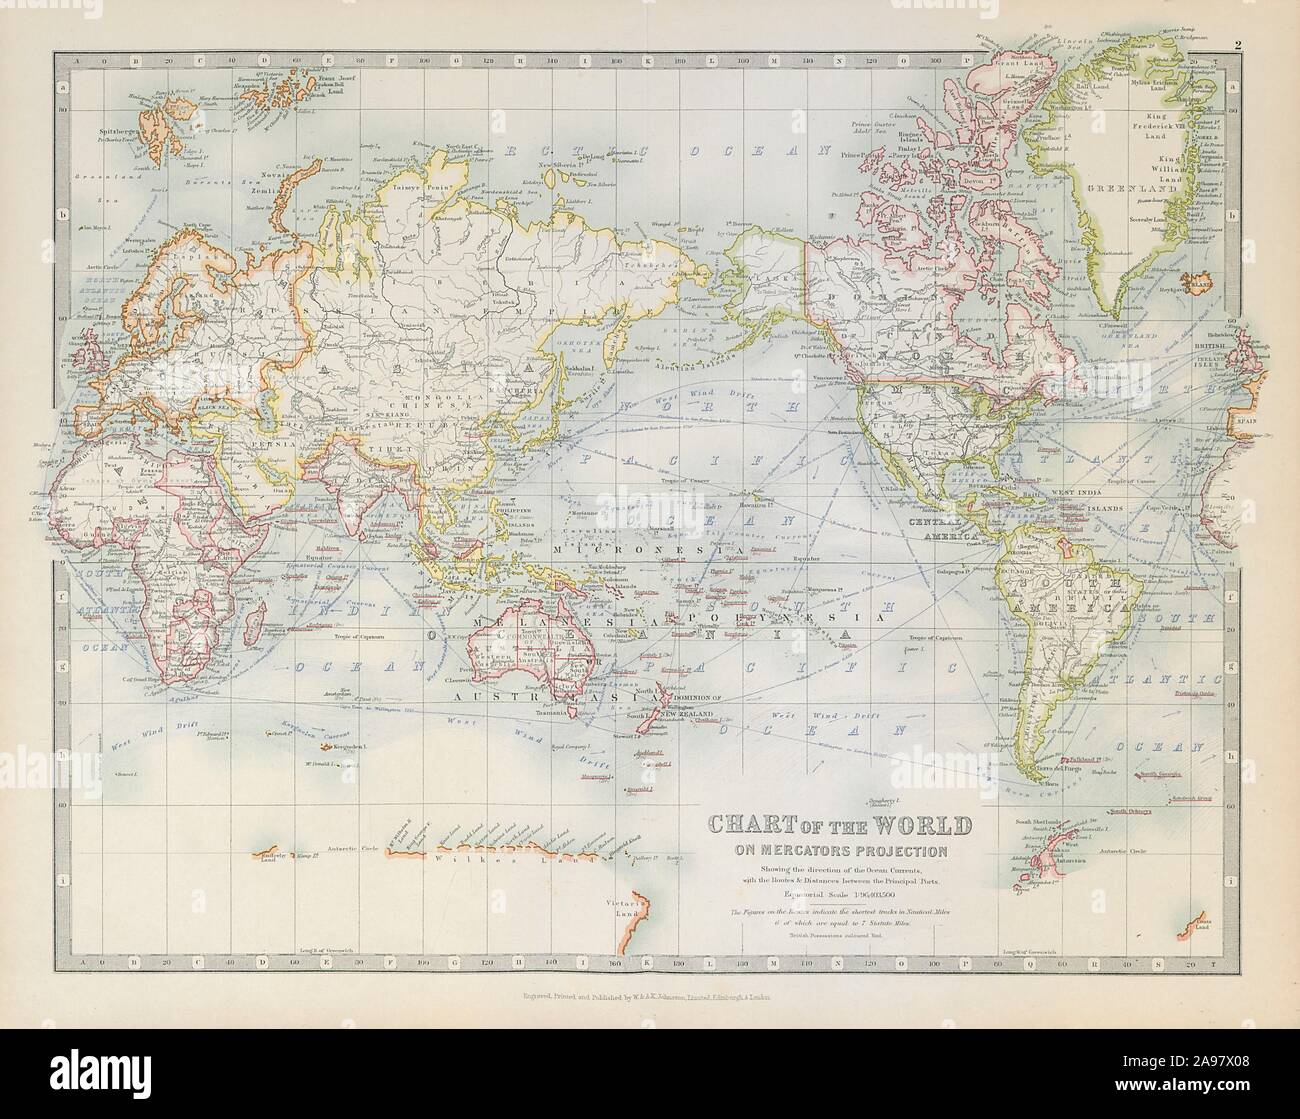 WORLD ON MERCATOR'S PROJECTION unusually Pacific-centred. JOHNSTON 1915 map Stock Photo